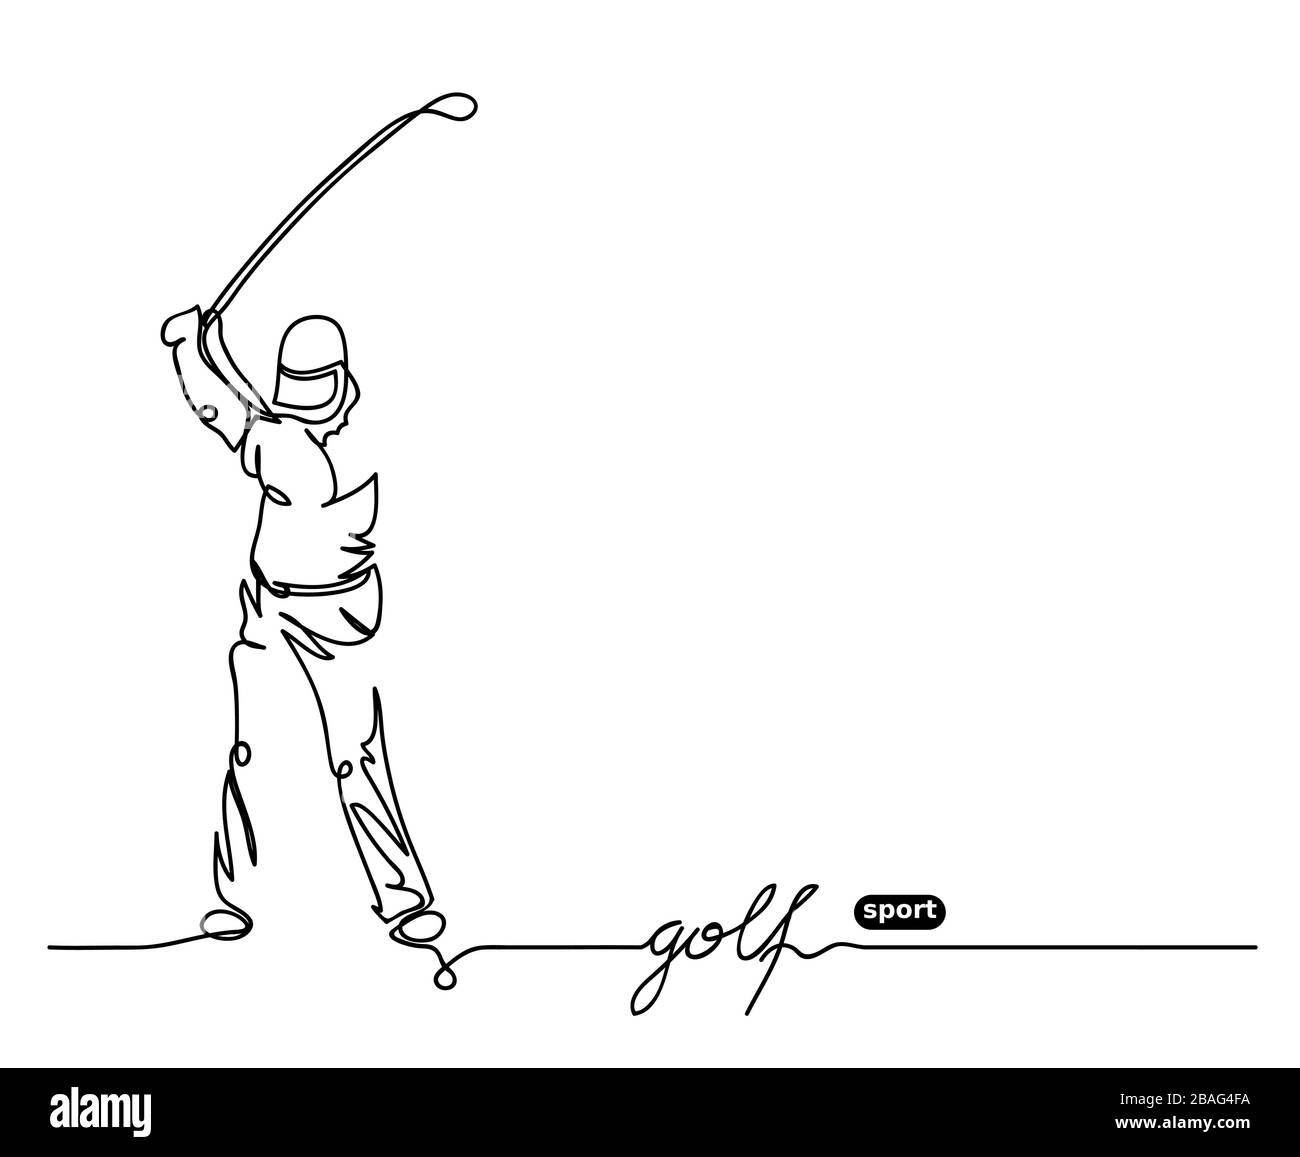 Golf player simple vector background. Stock Vector